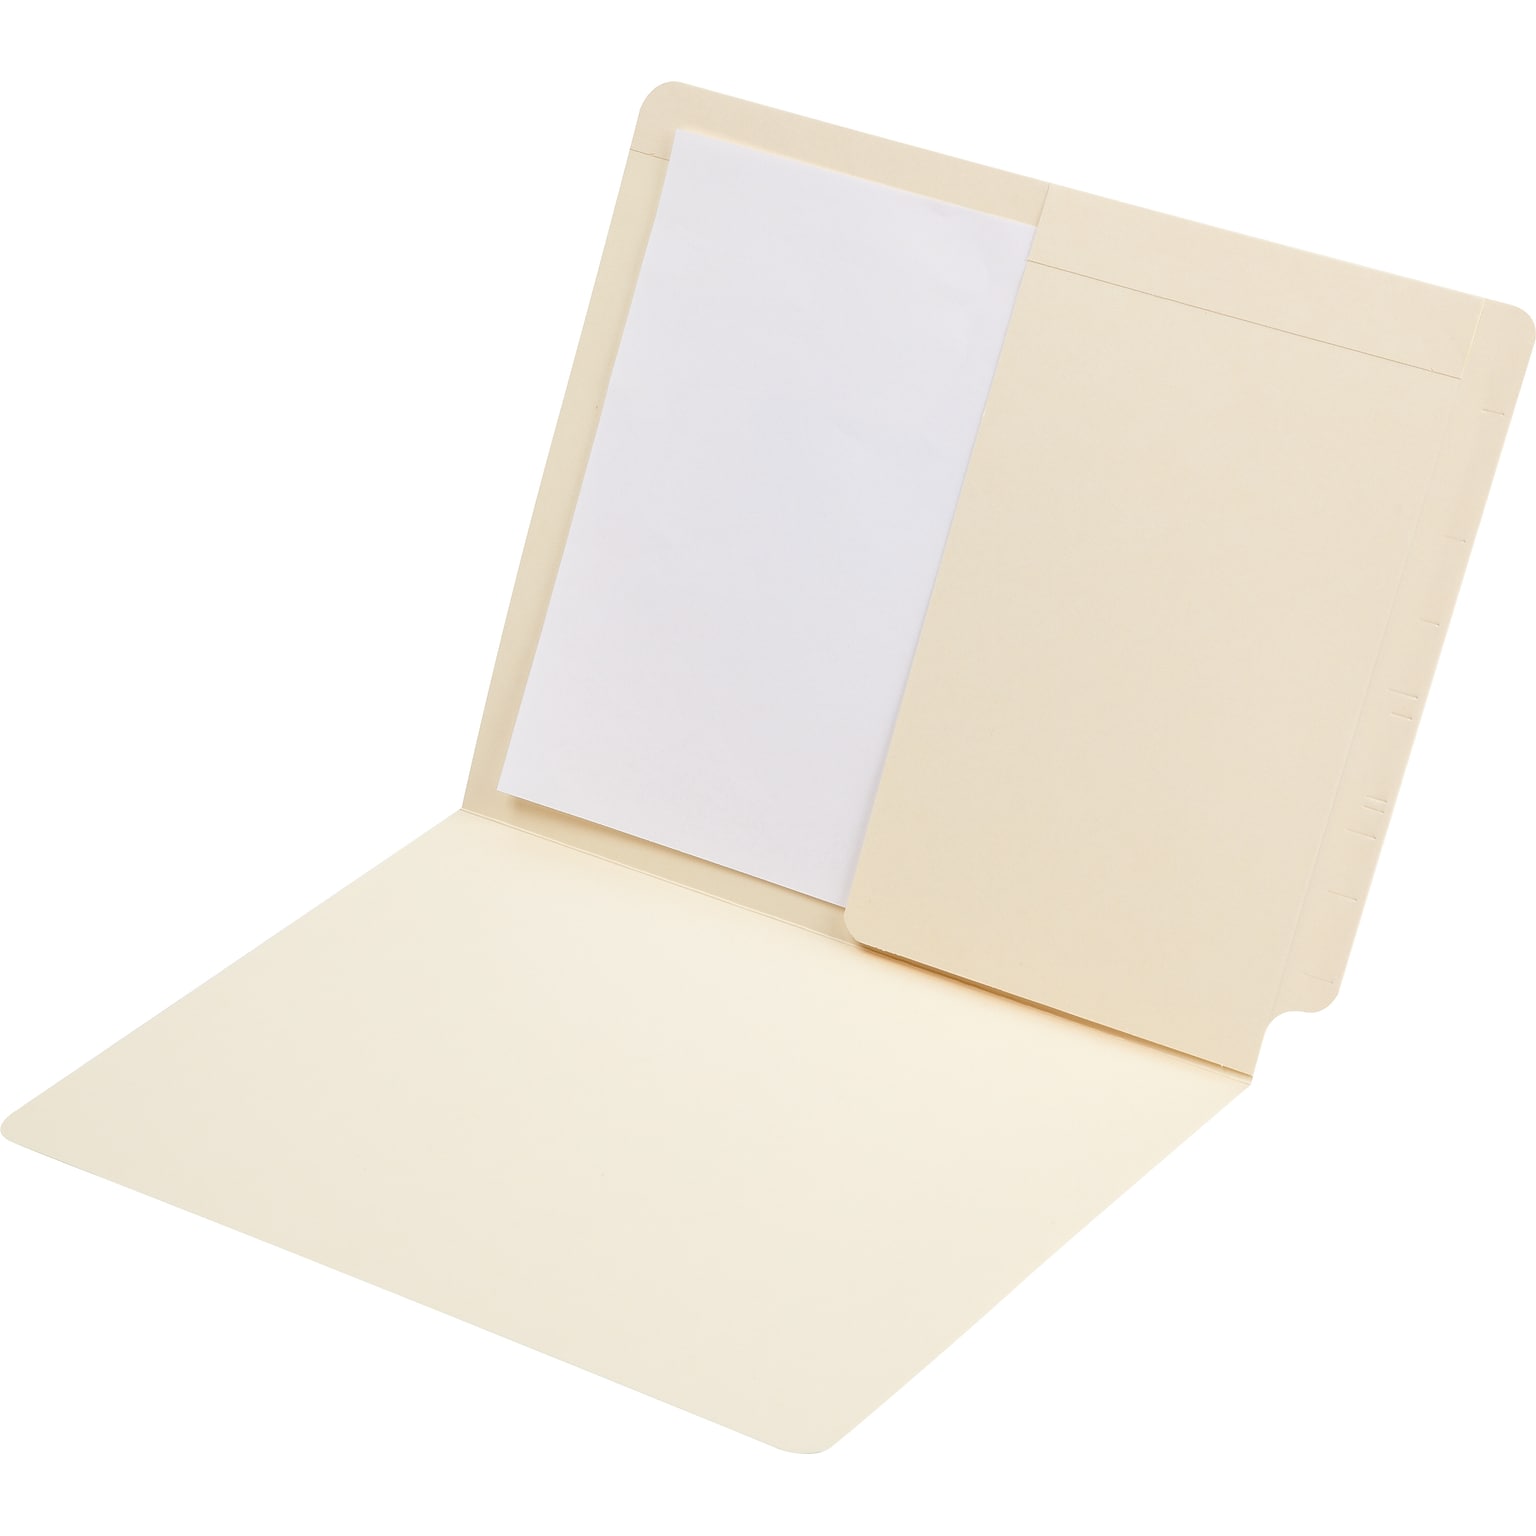 Medical Arts Press® End-Tab Folders with Single Pocket and No Fasteners , 11 Point, 50/Box